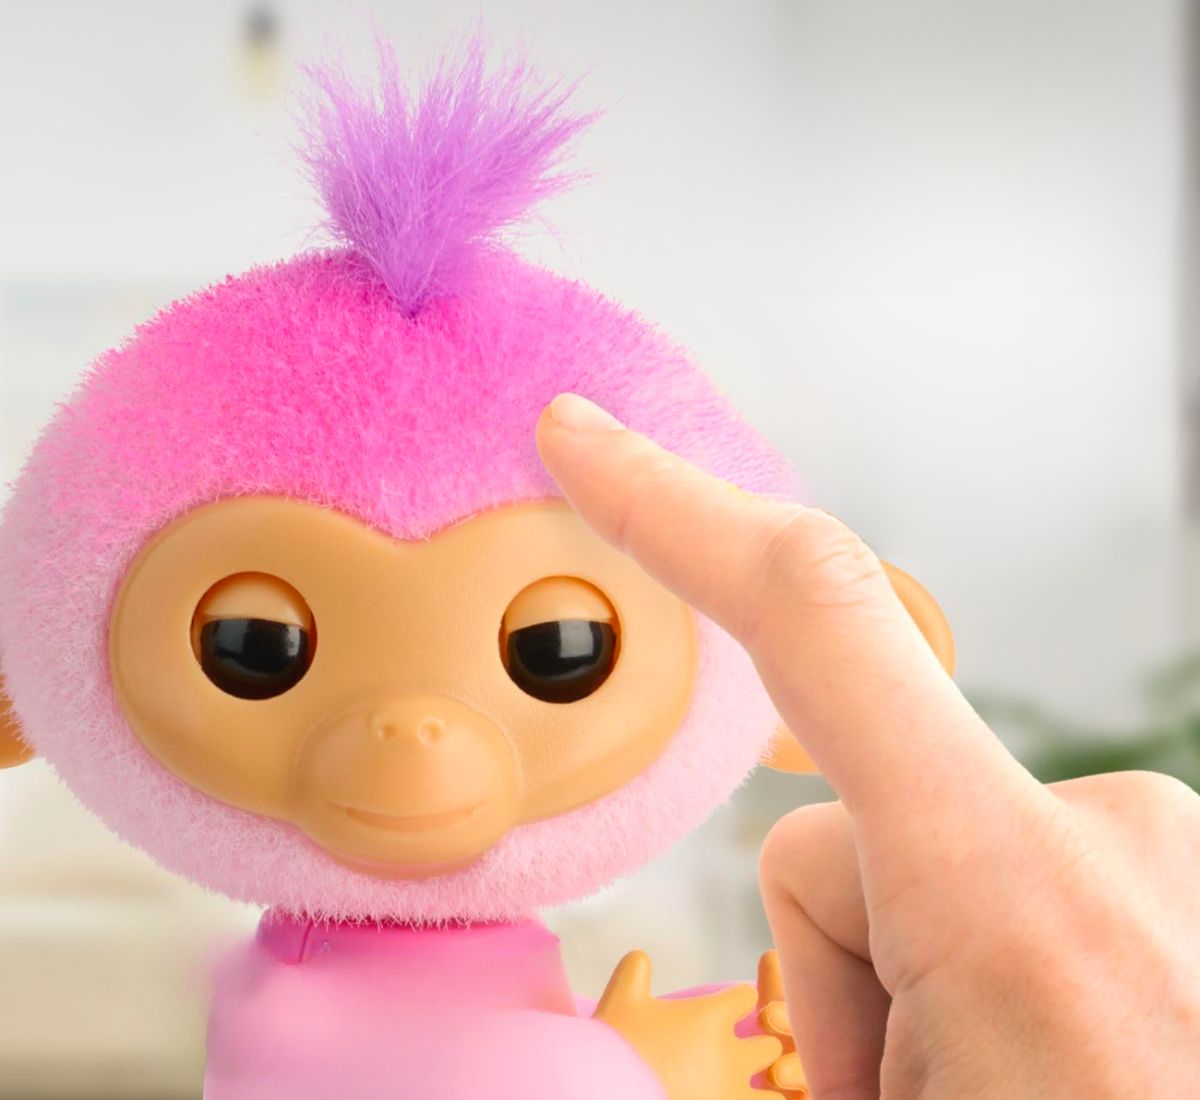 a finger reaching out to pet a pink fingerlings monkey named harmony with fuzzy hair on her head